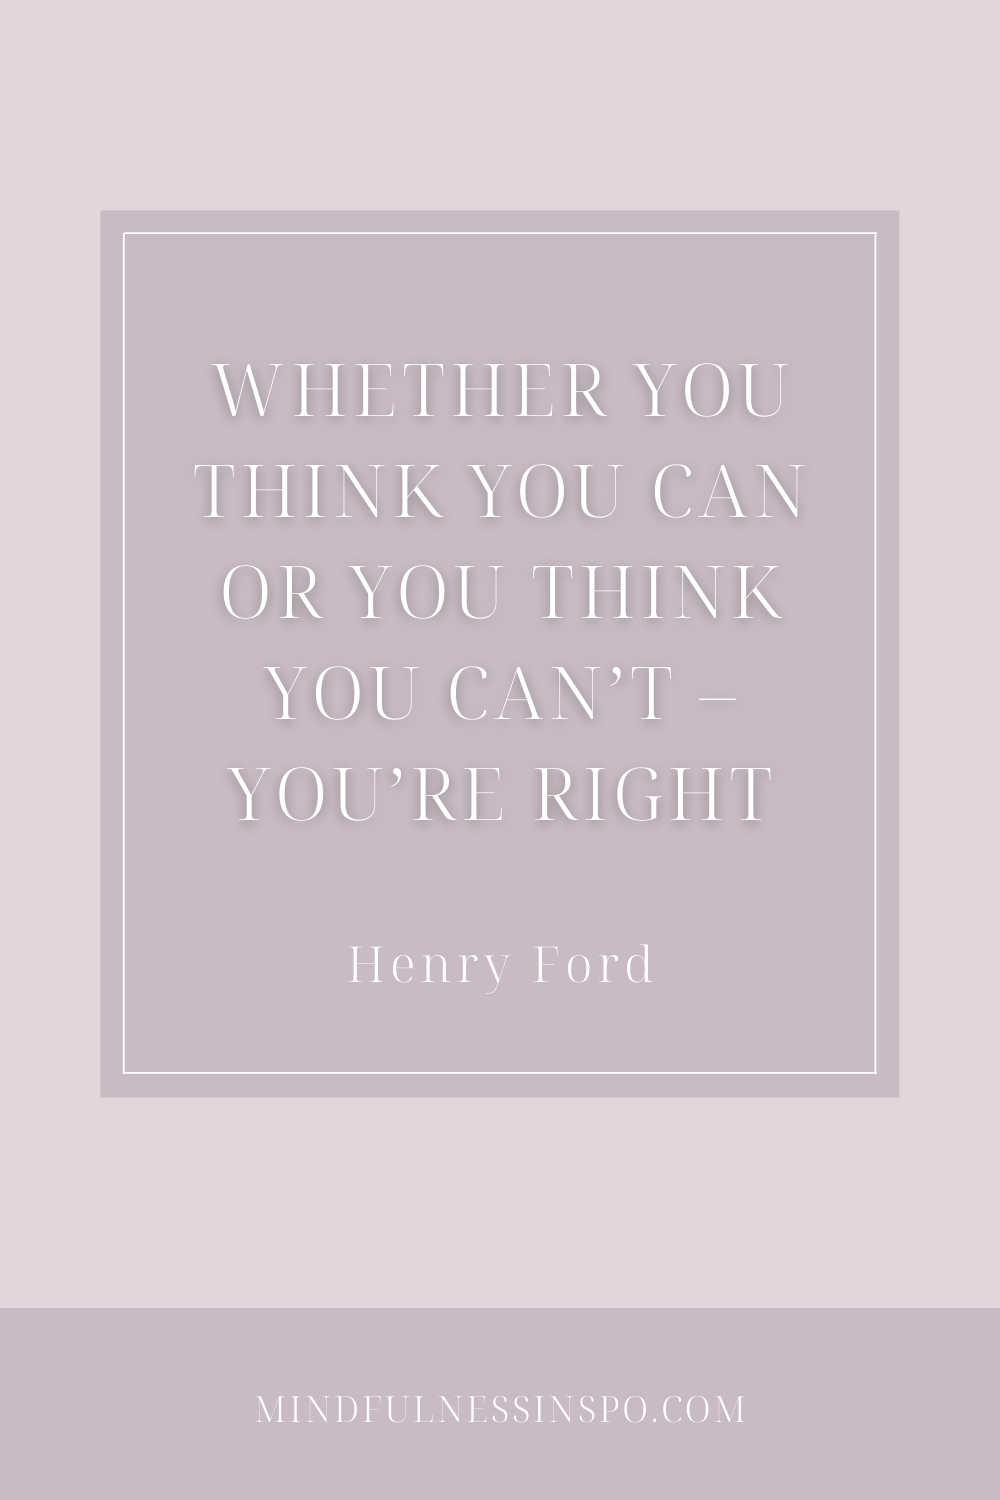 motivational quotes: whether you think you can or you think you can't - you're right. Henry Ford. more on mindfulnessinspo.com